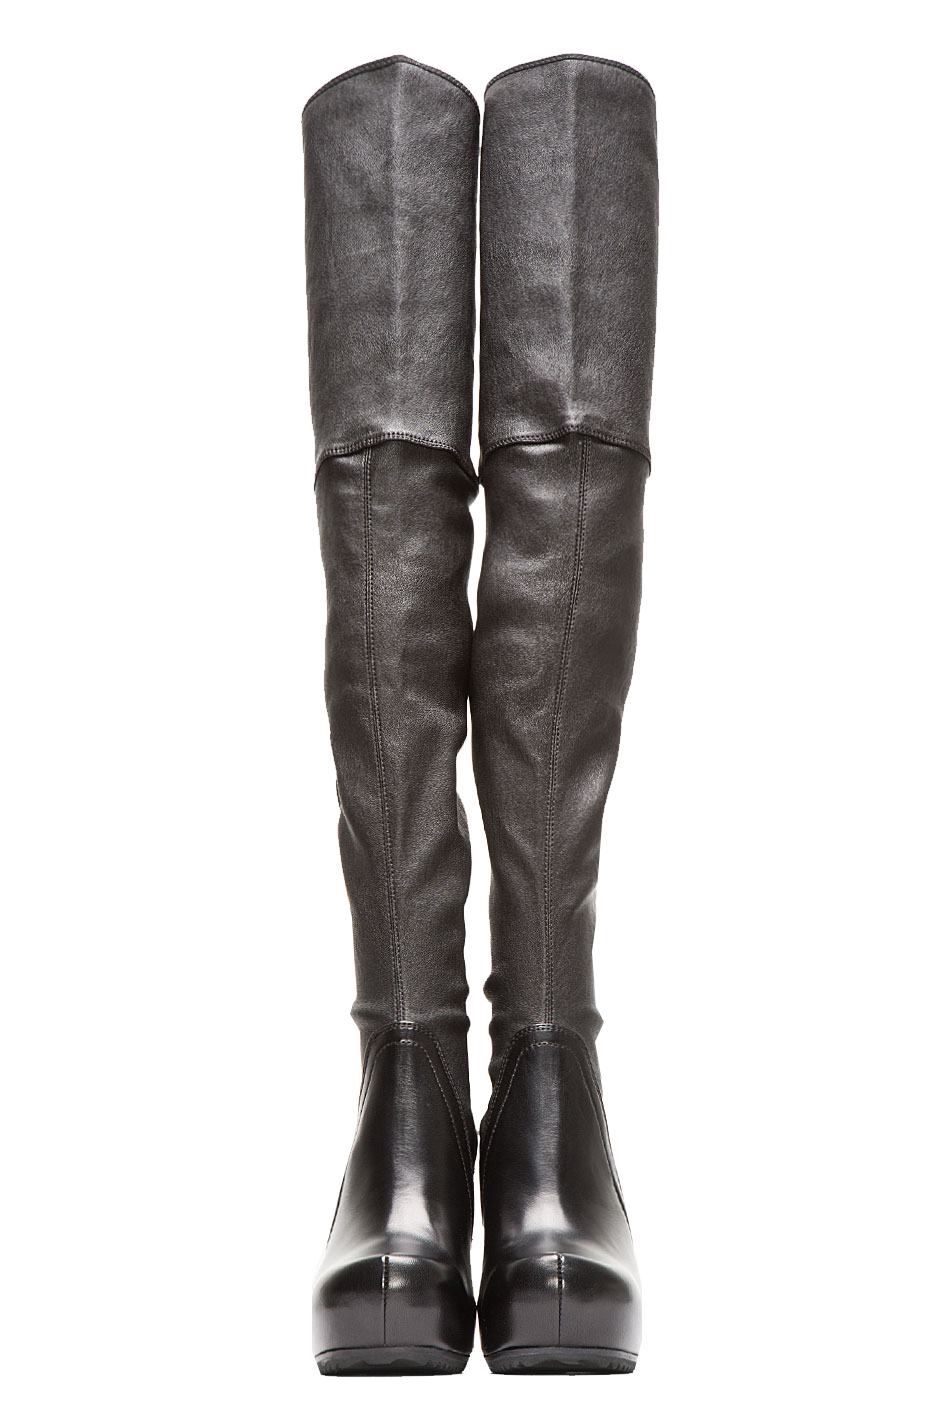 Rick Owens Black Stretch Leather Over The Knee Wedge Boots